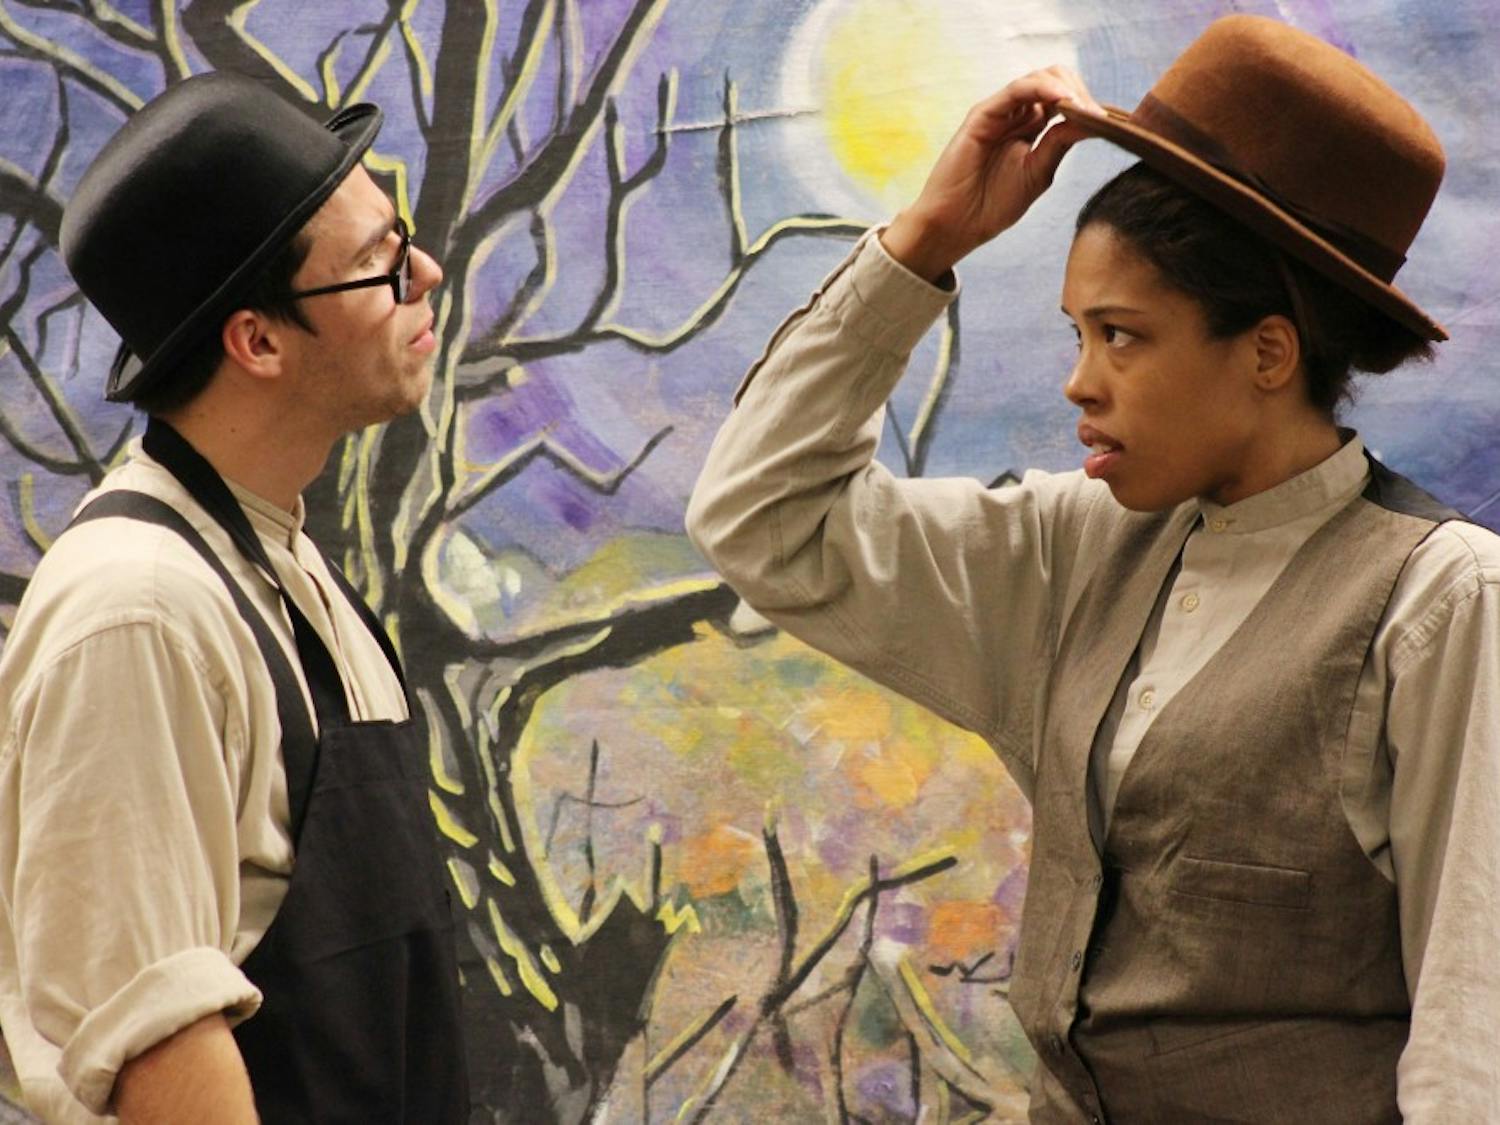 Bright Star theatre presents "Heroes of the Underground Railroad" at the main Orange County Library in Hillsborough at 6:00 p.m. Thursday evening. Kaurie Tubman (left) and Travis Emery (right) performed all roles in the play.